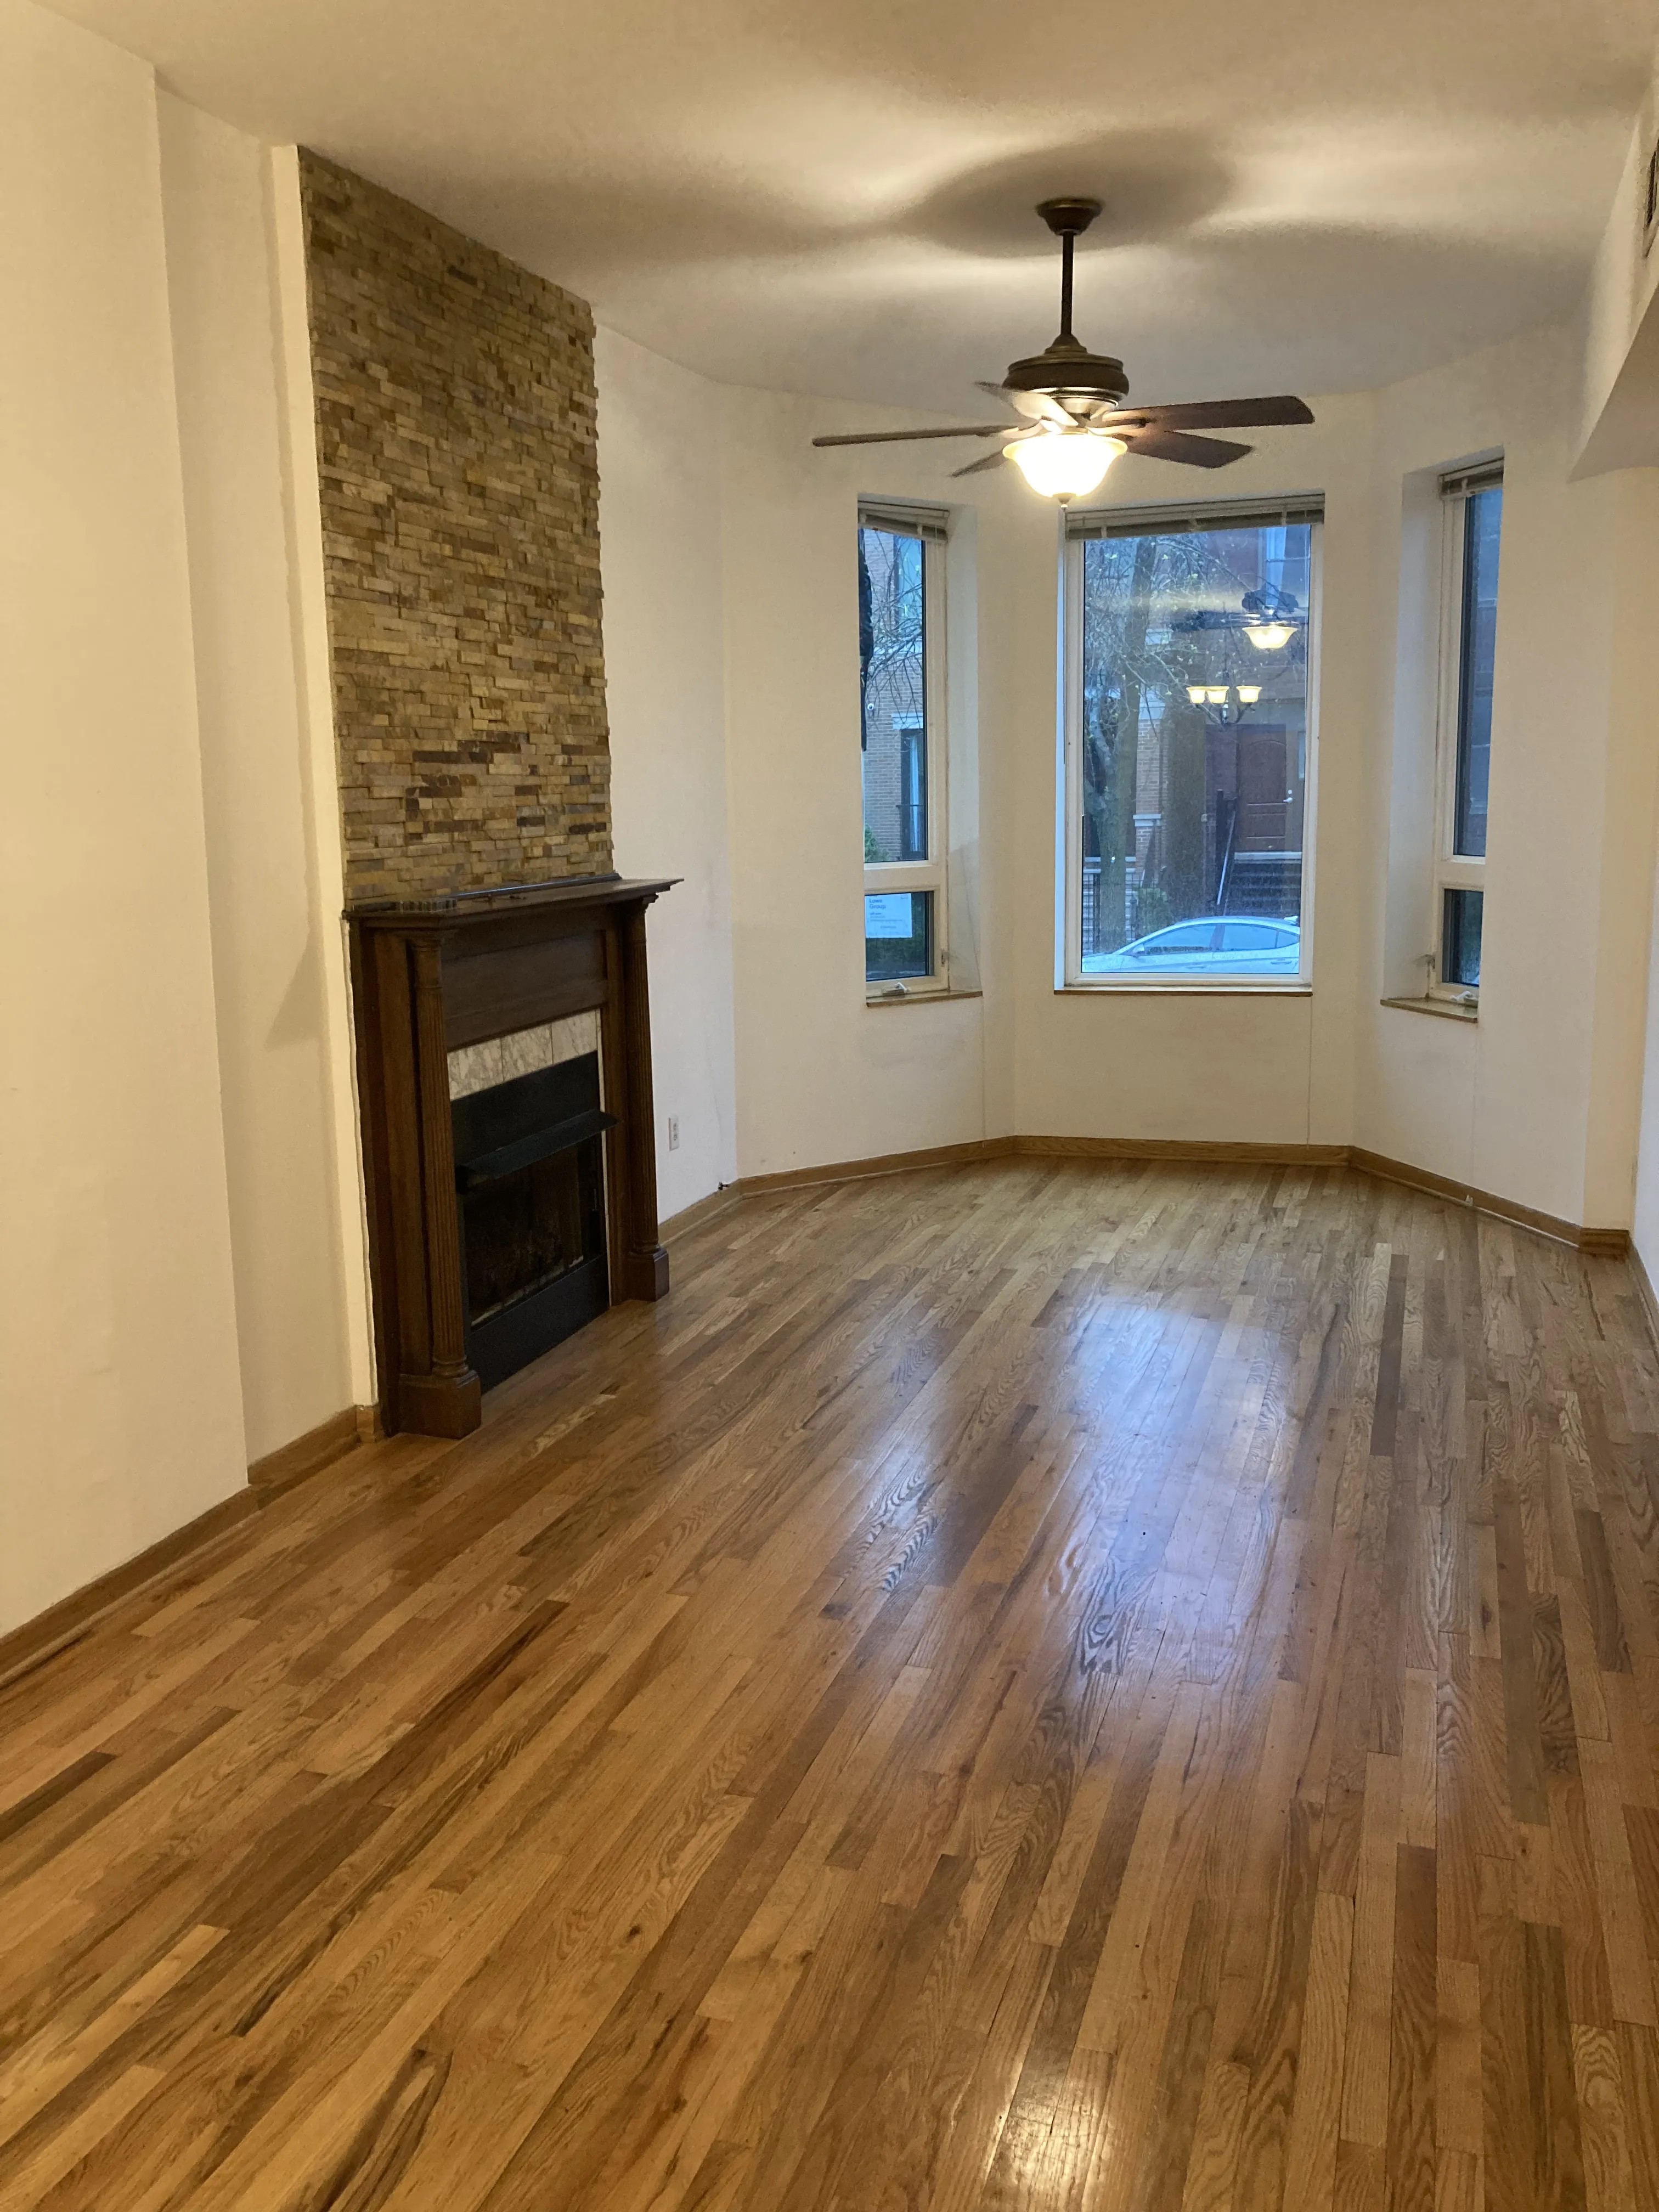 1621 N WINCHESTER AVE 60622-unit#1-Chicago-IL